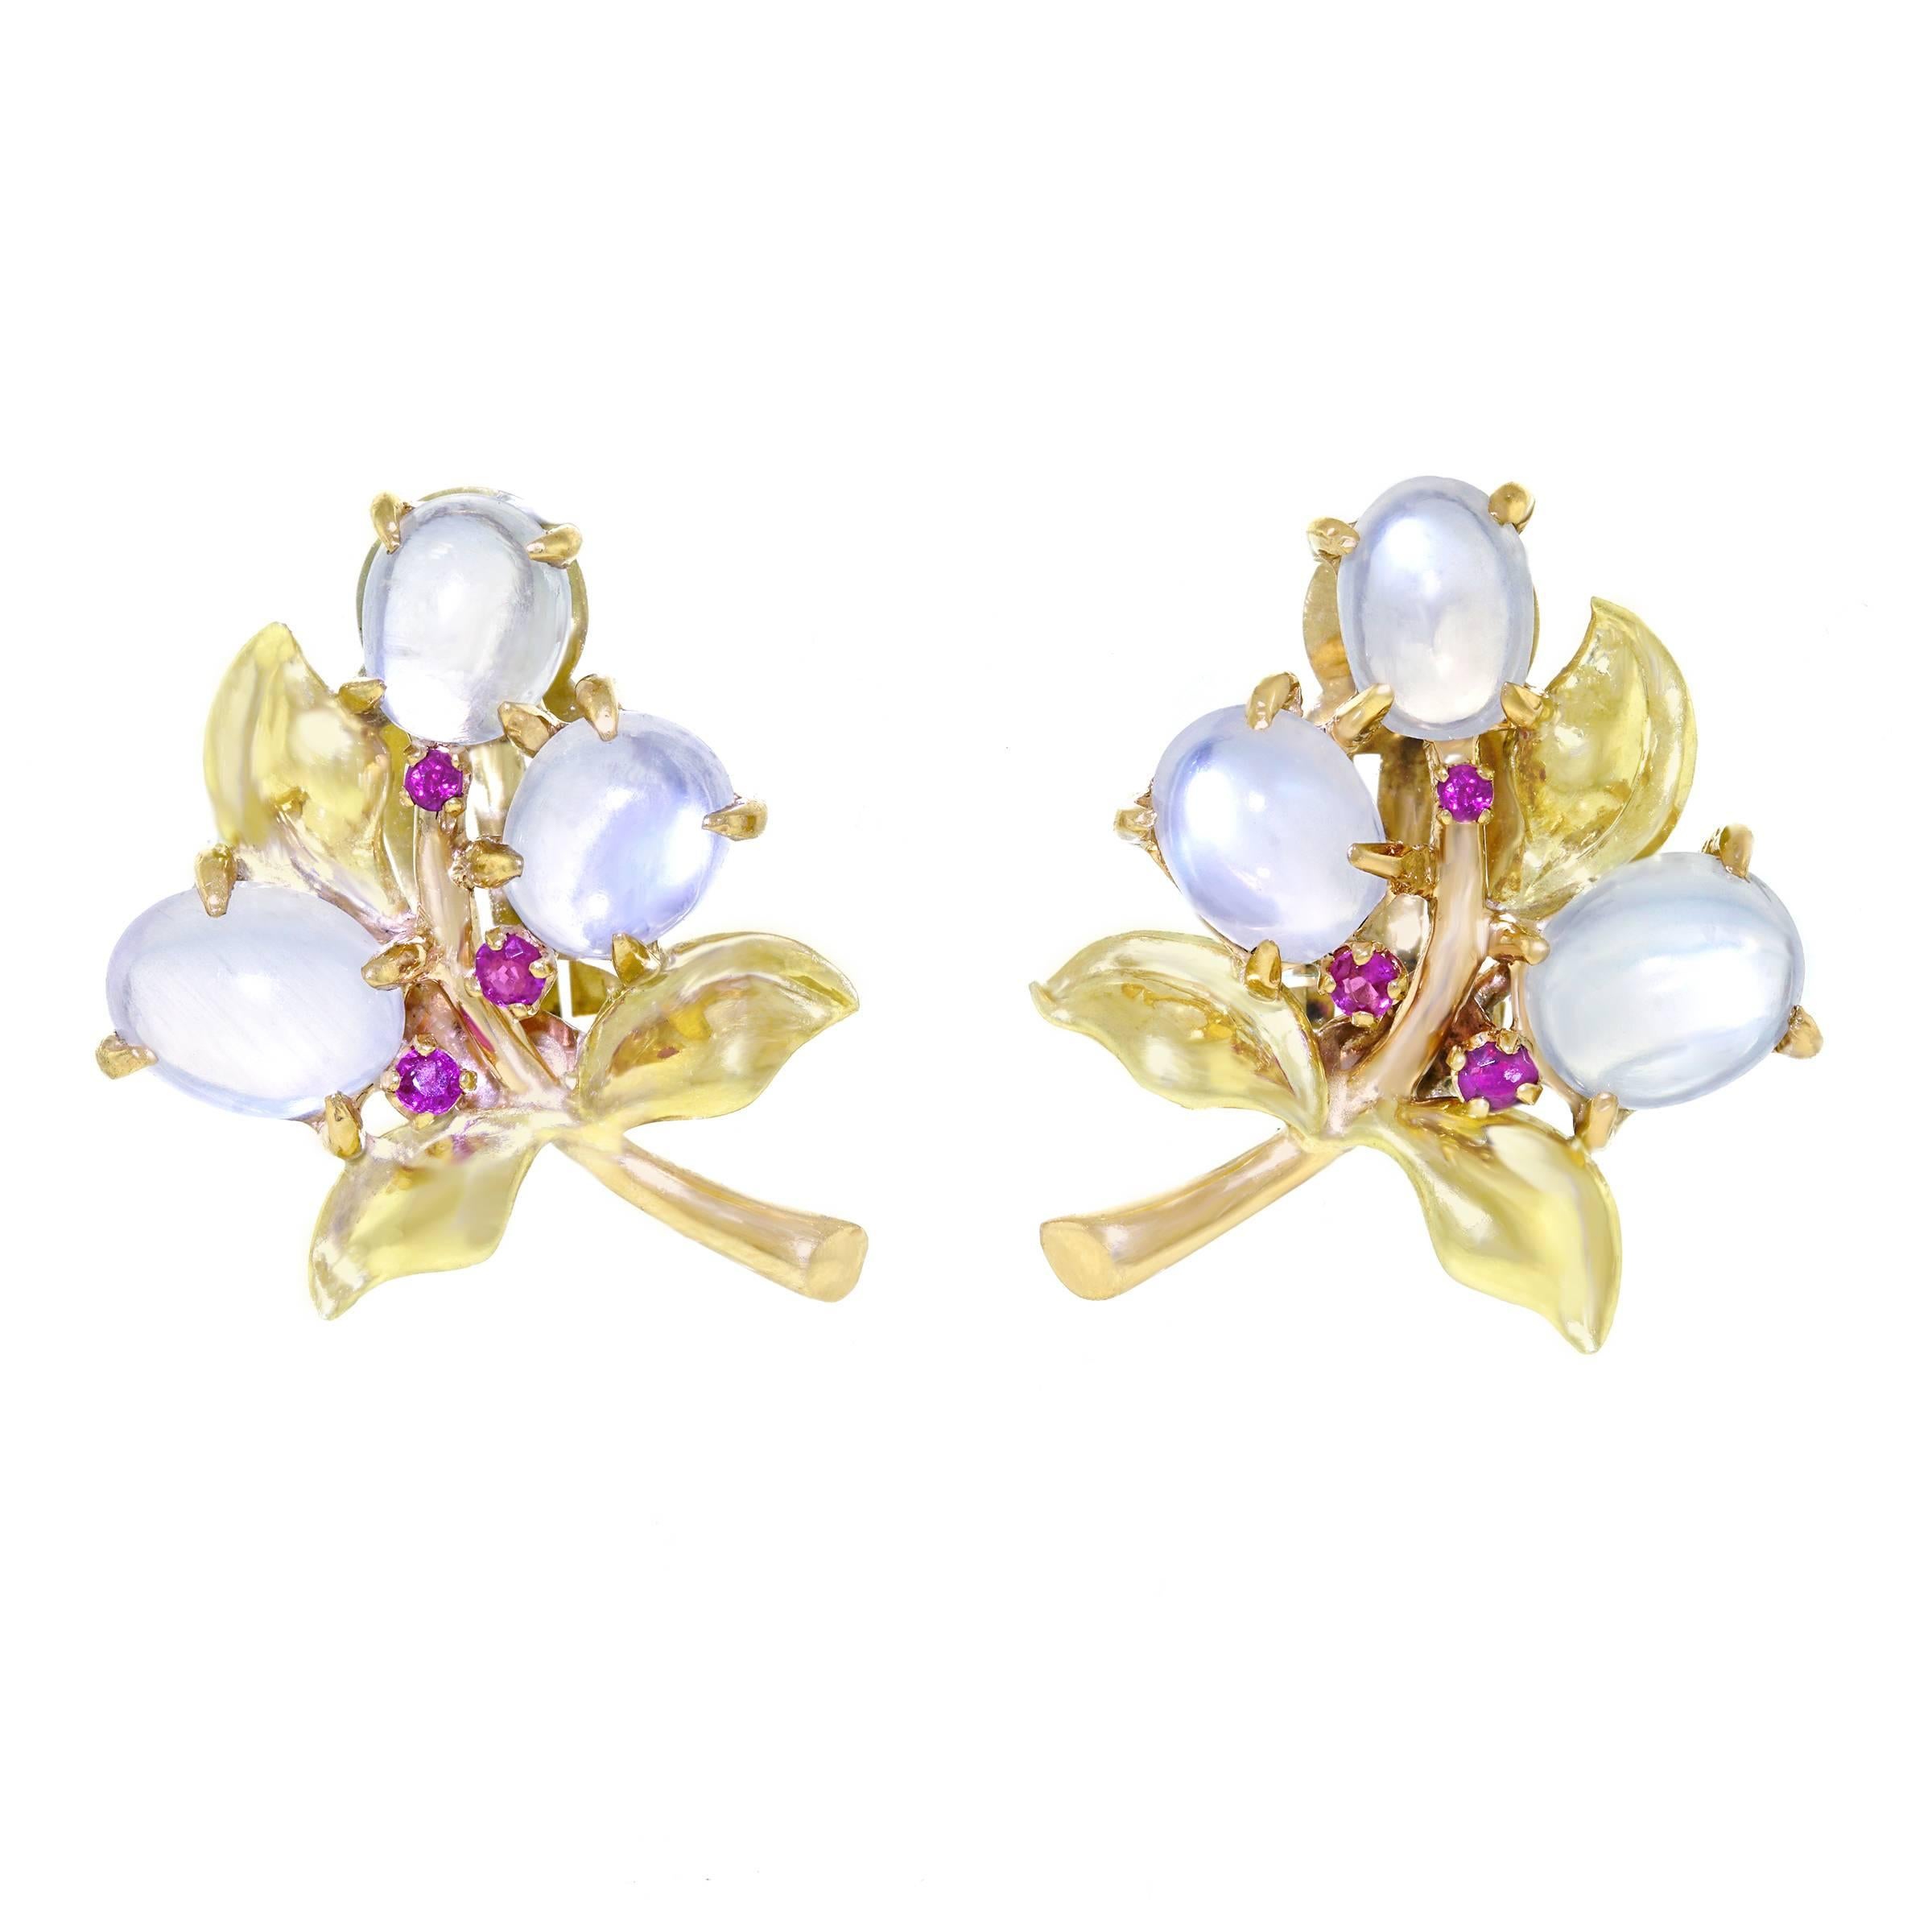 Retro 1950s Moonstone and Ruby Gold Earrings